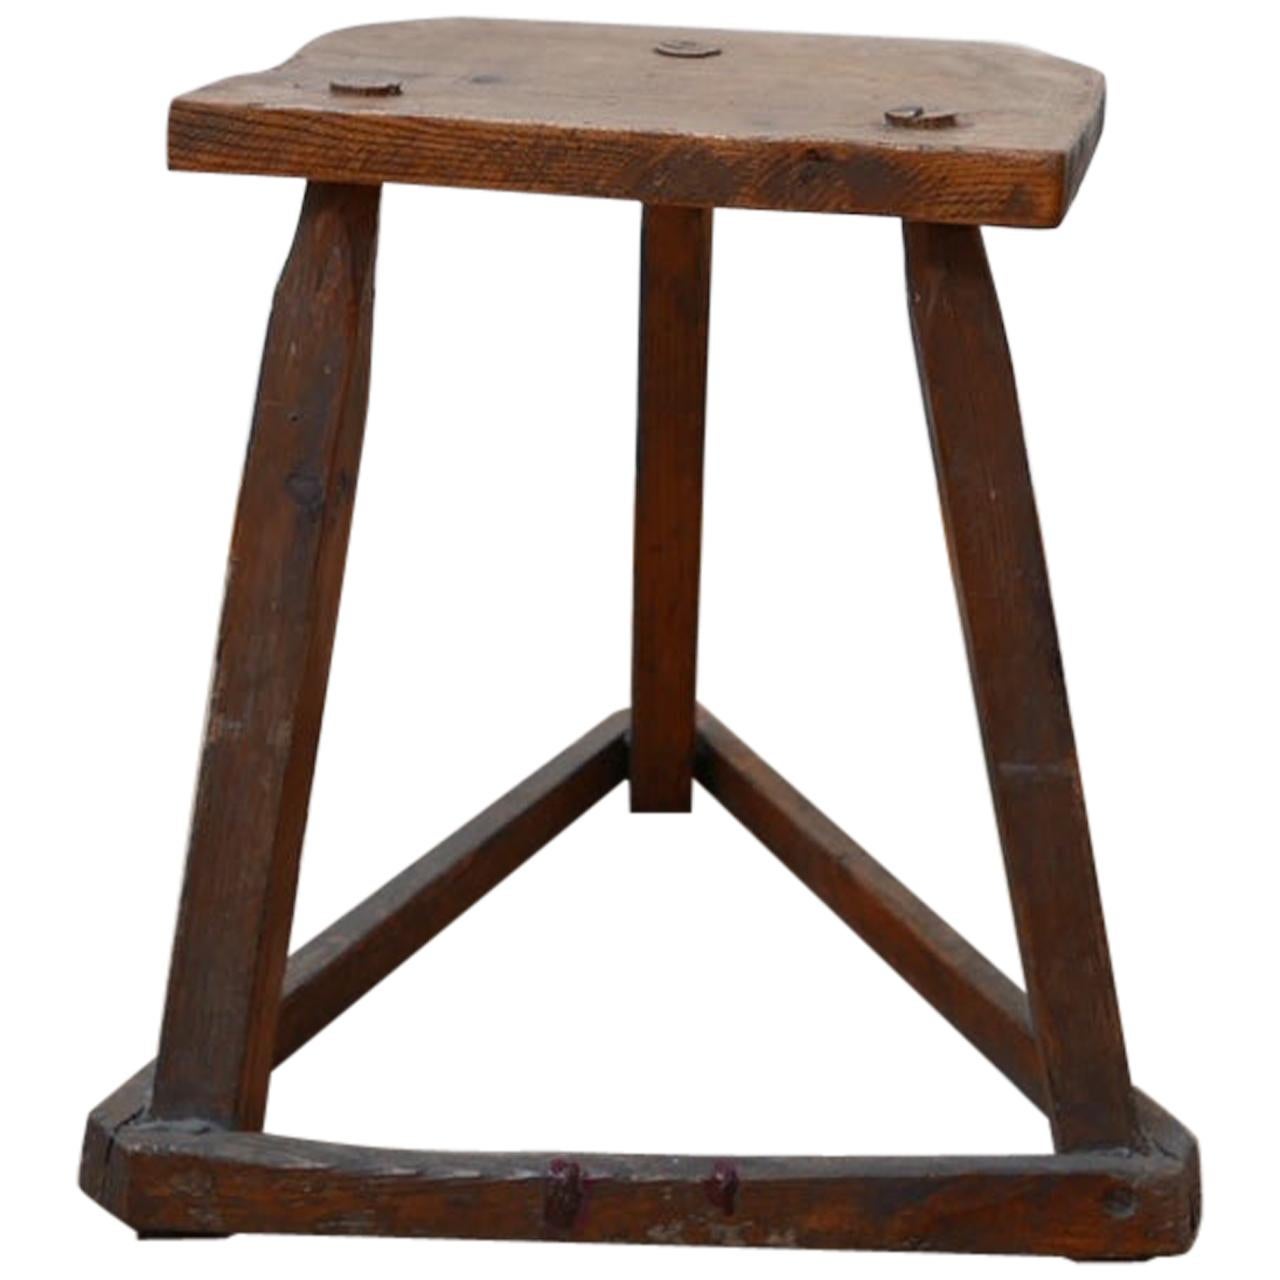 Antique English Wooden Cutler's Stool or Side Table 'No.1'